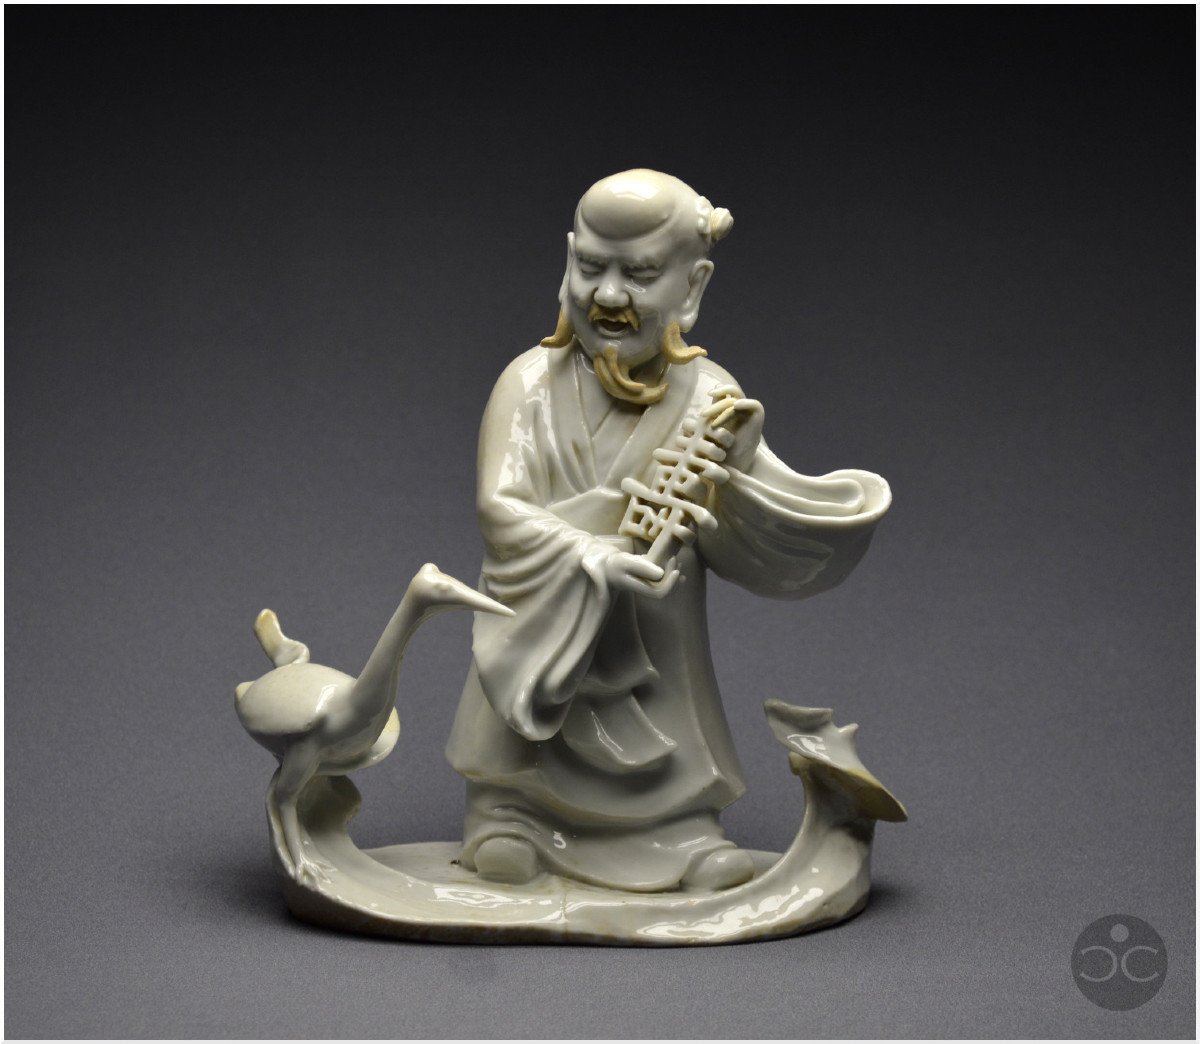 China, 18th Century, Chinese White Porcelain Group Representing The Taoist God Shoulao